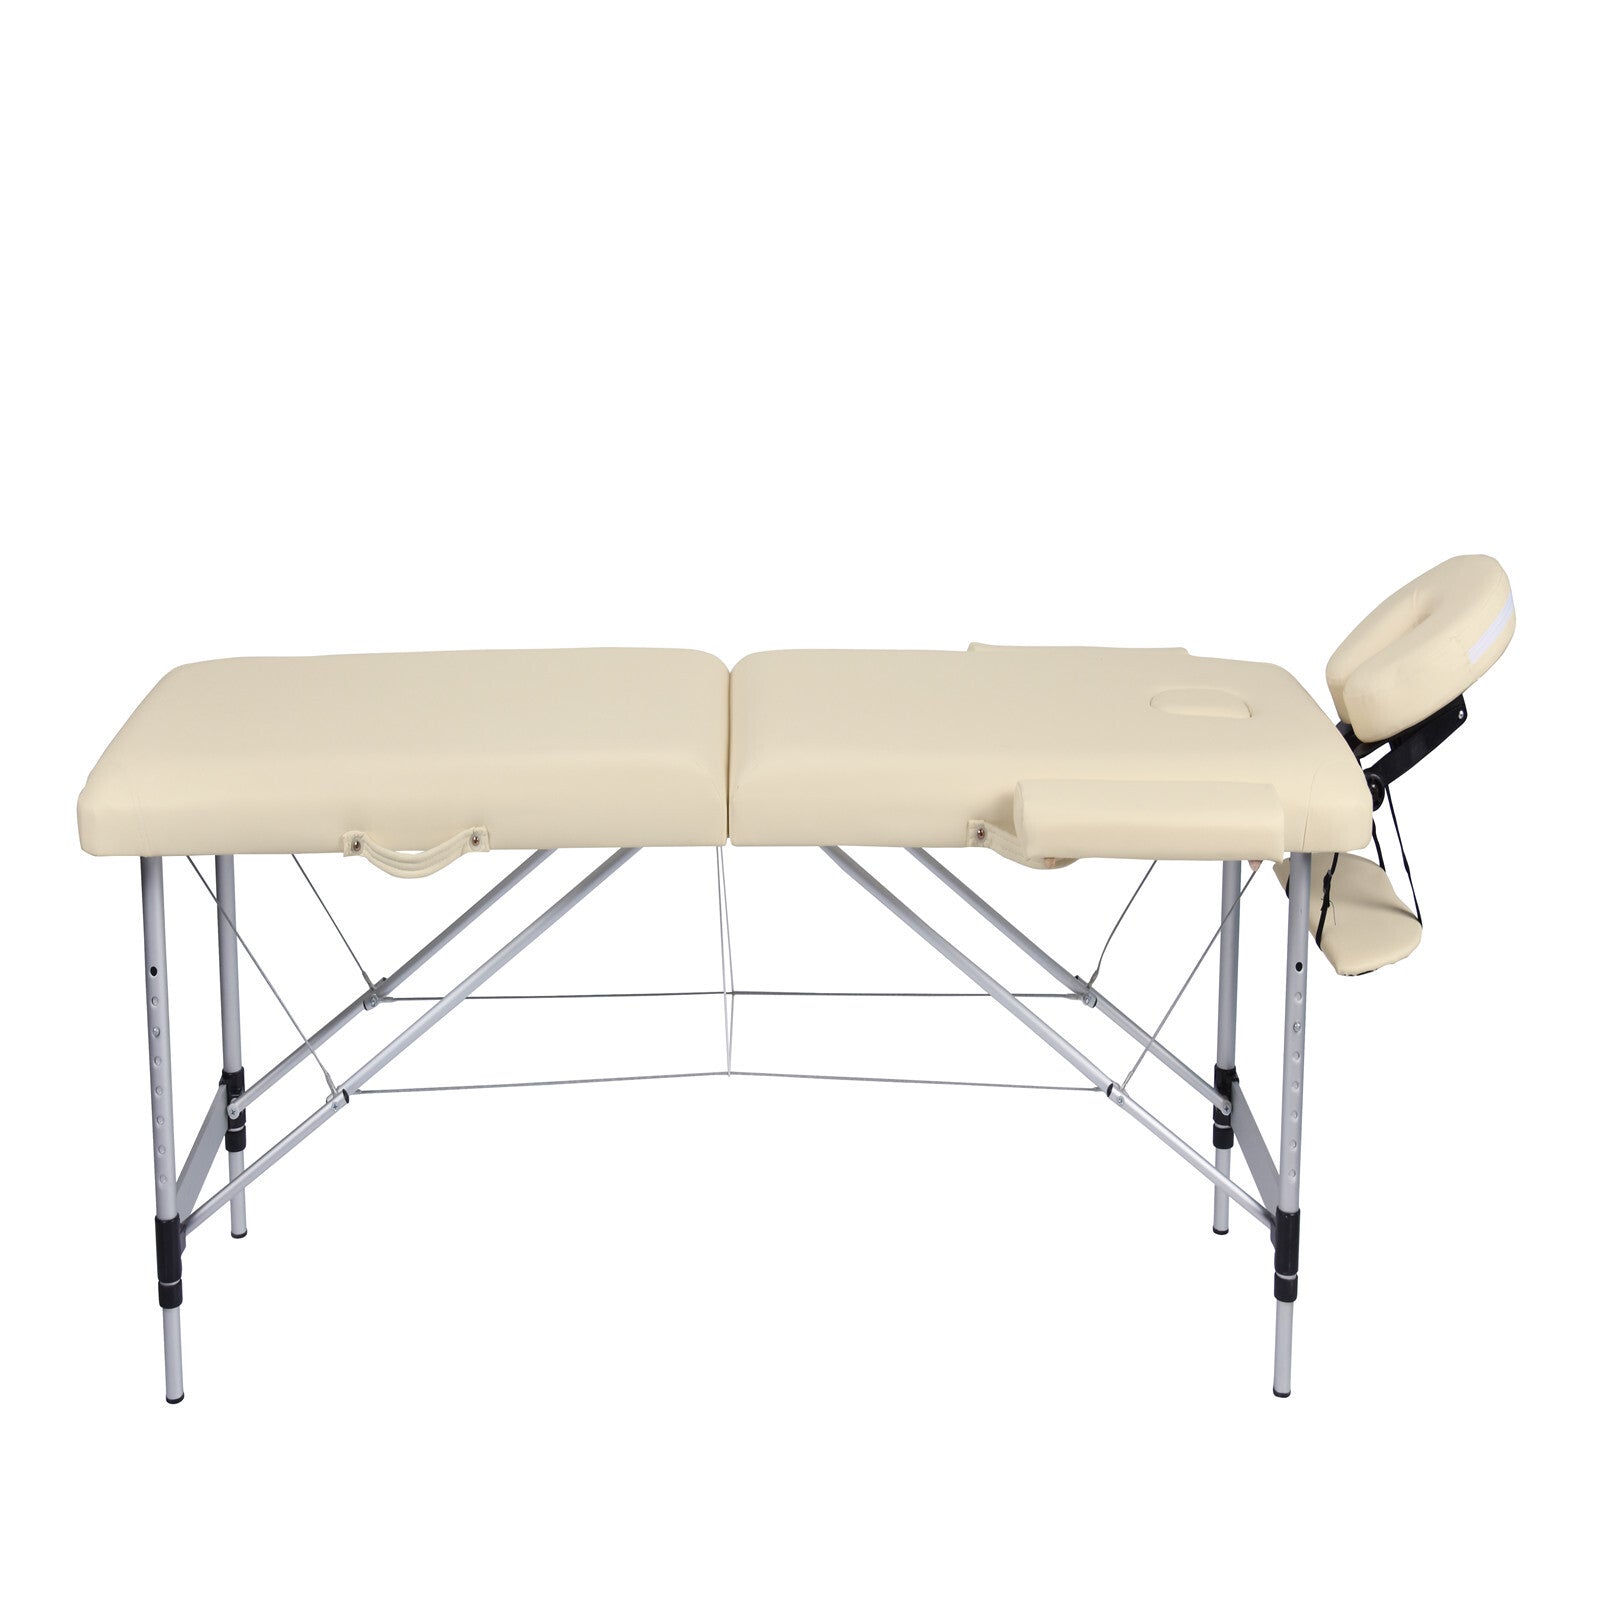 YES4HOMES 2 Fold Portable Aluminium Massage Table Massage Bed Beauty Therapy Beige